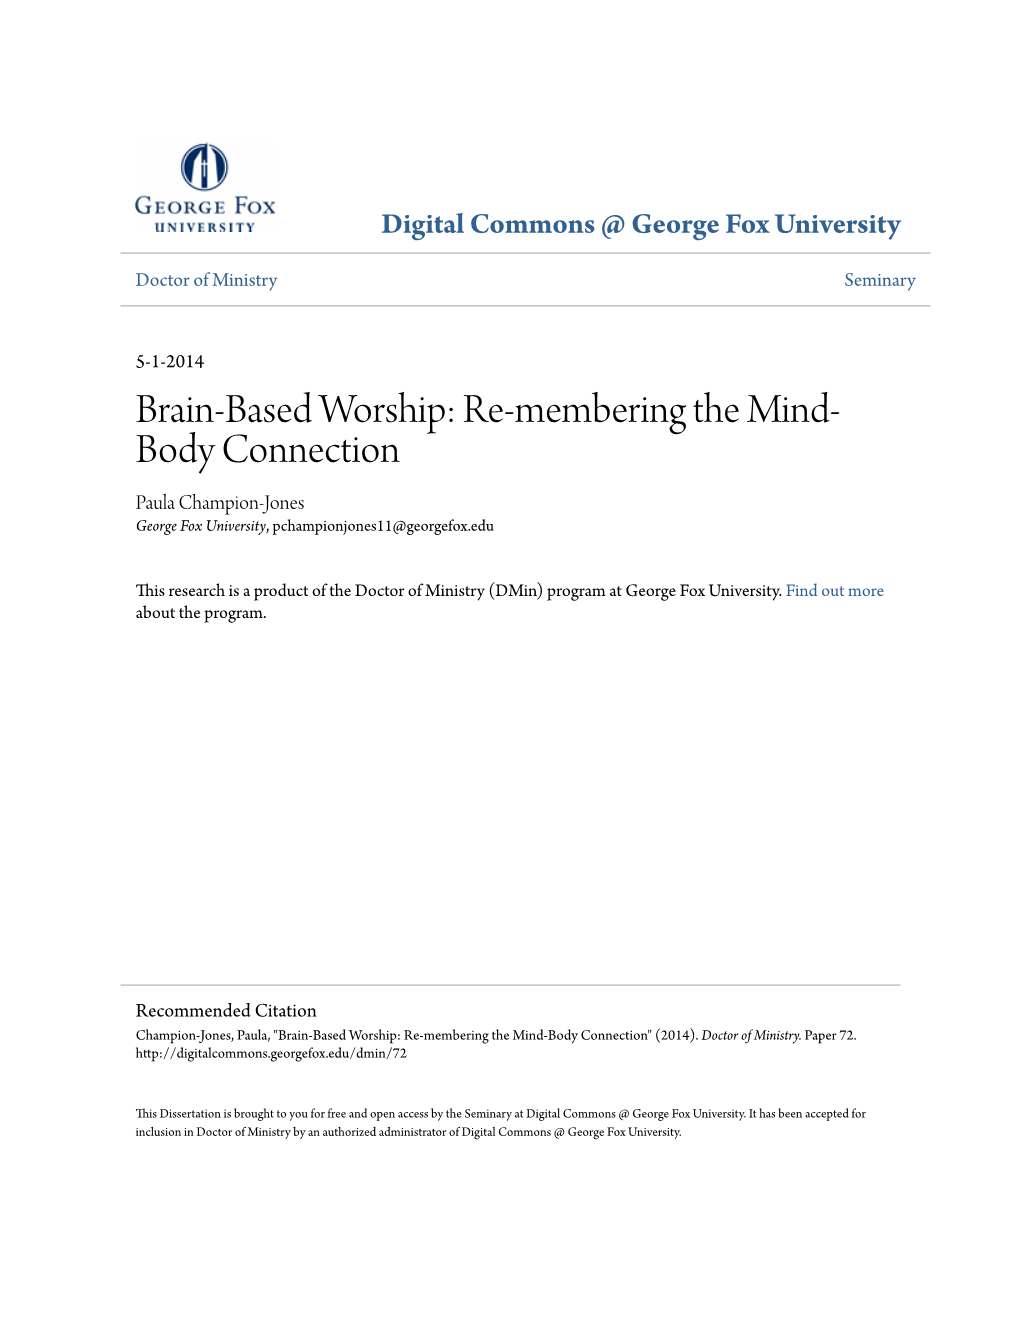 Brain-Based Worship: Re-Membering the Mind-Body Connection" (2014)